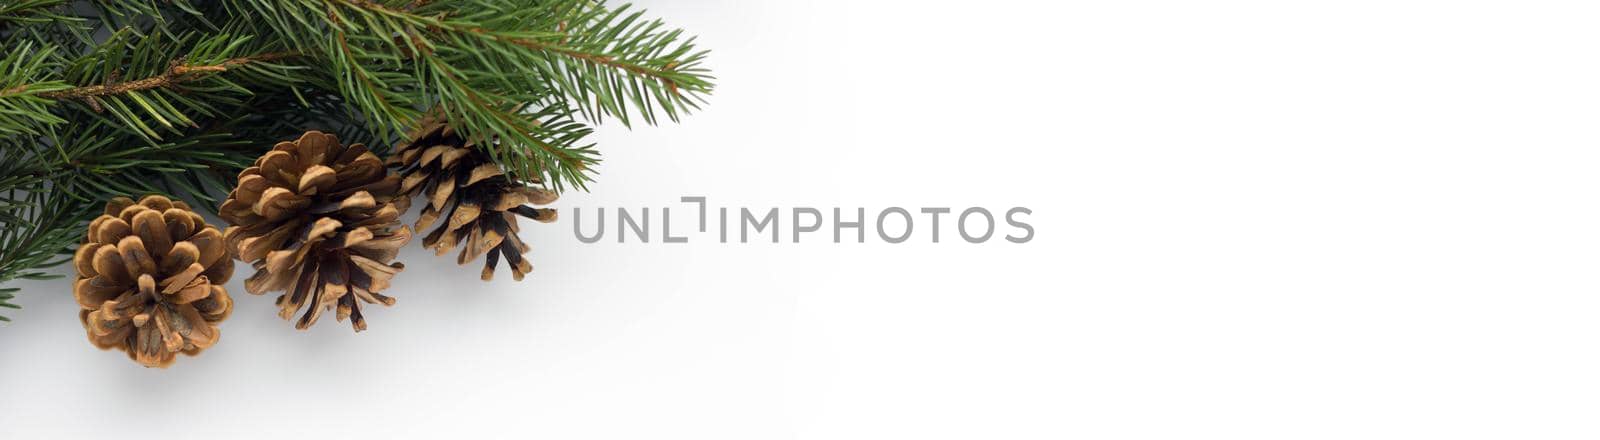 Christmas panorama: fresh pine branches with cones on a white background. View from above. place for your text by lapushka62